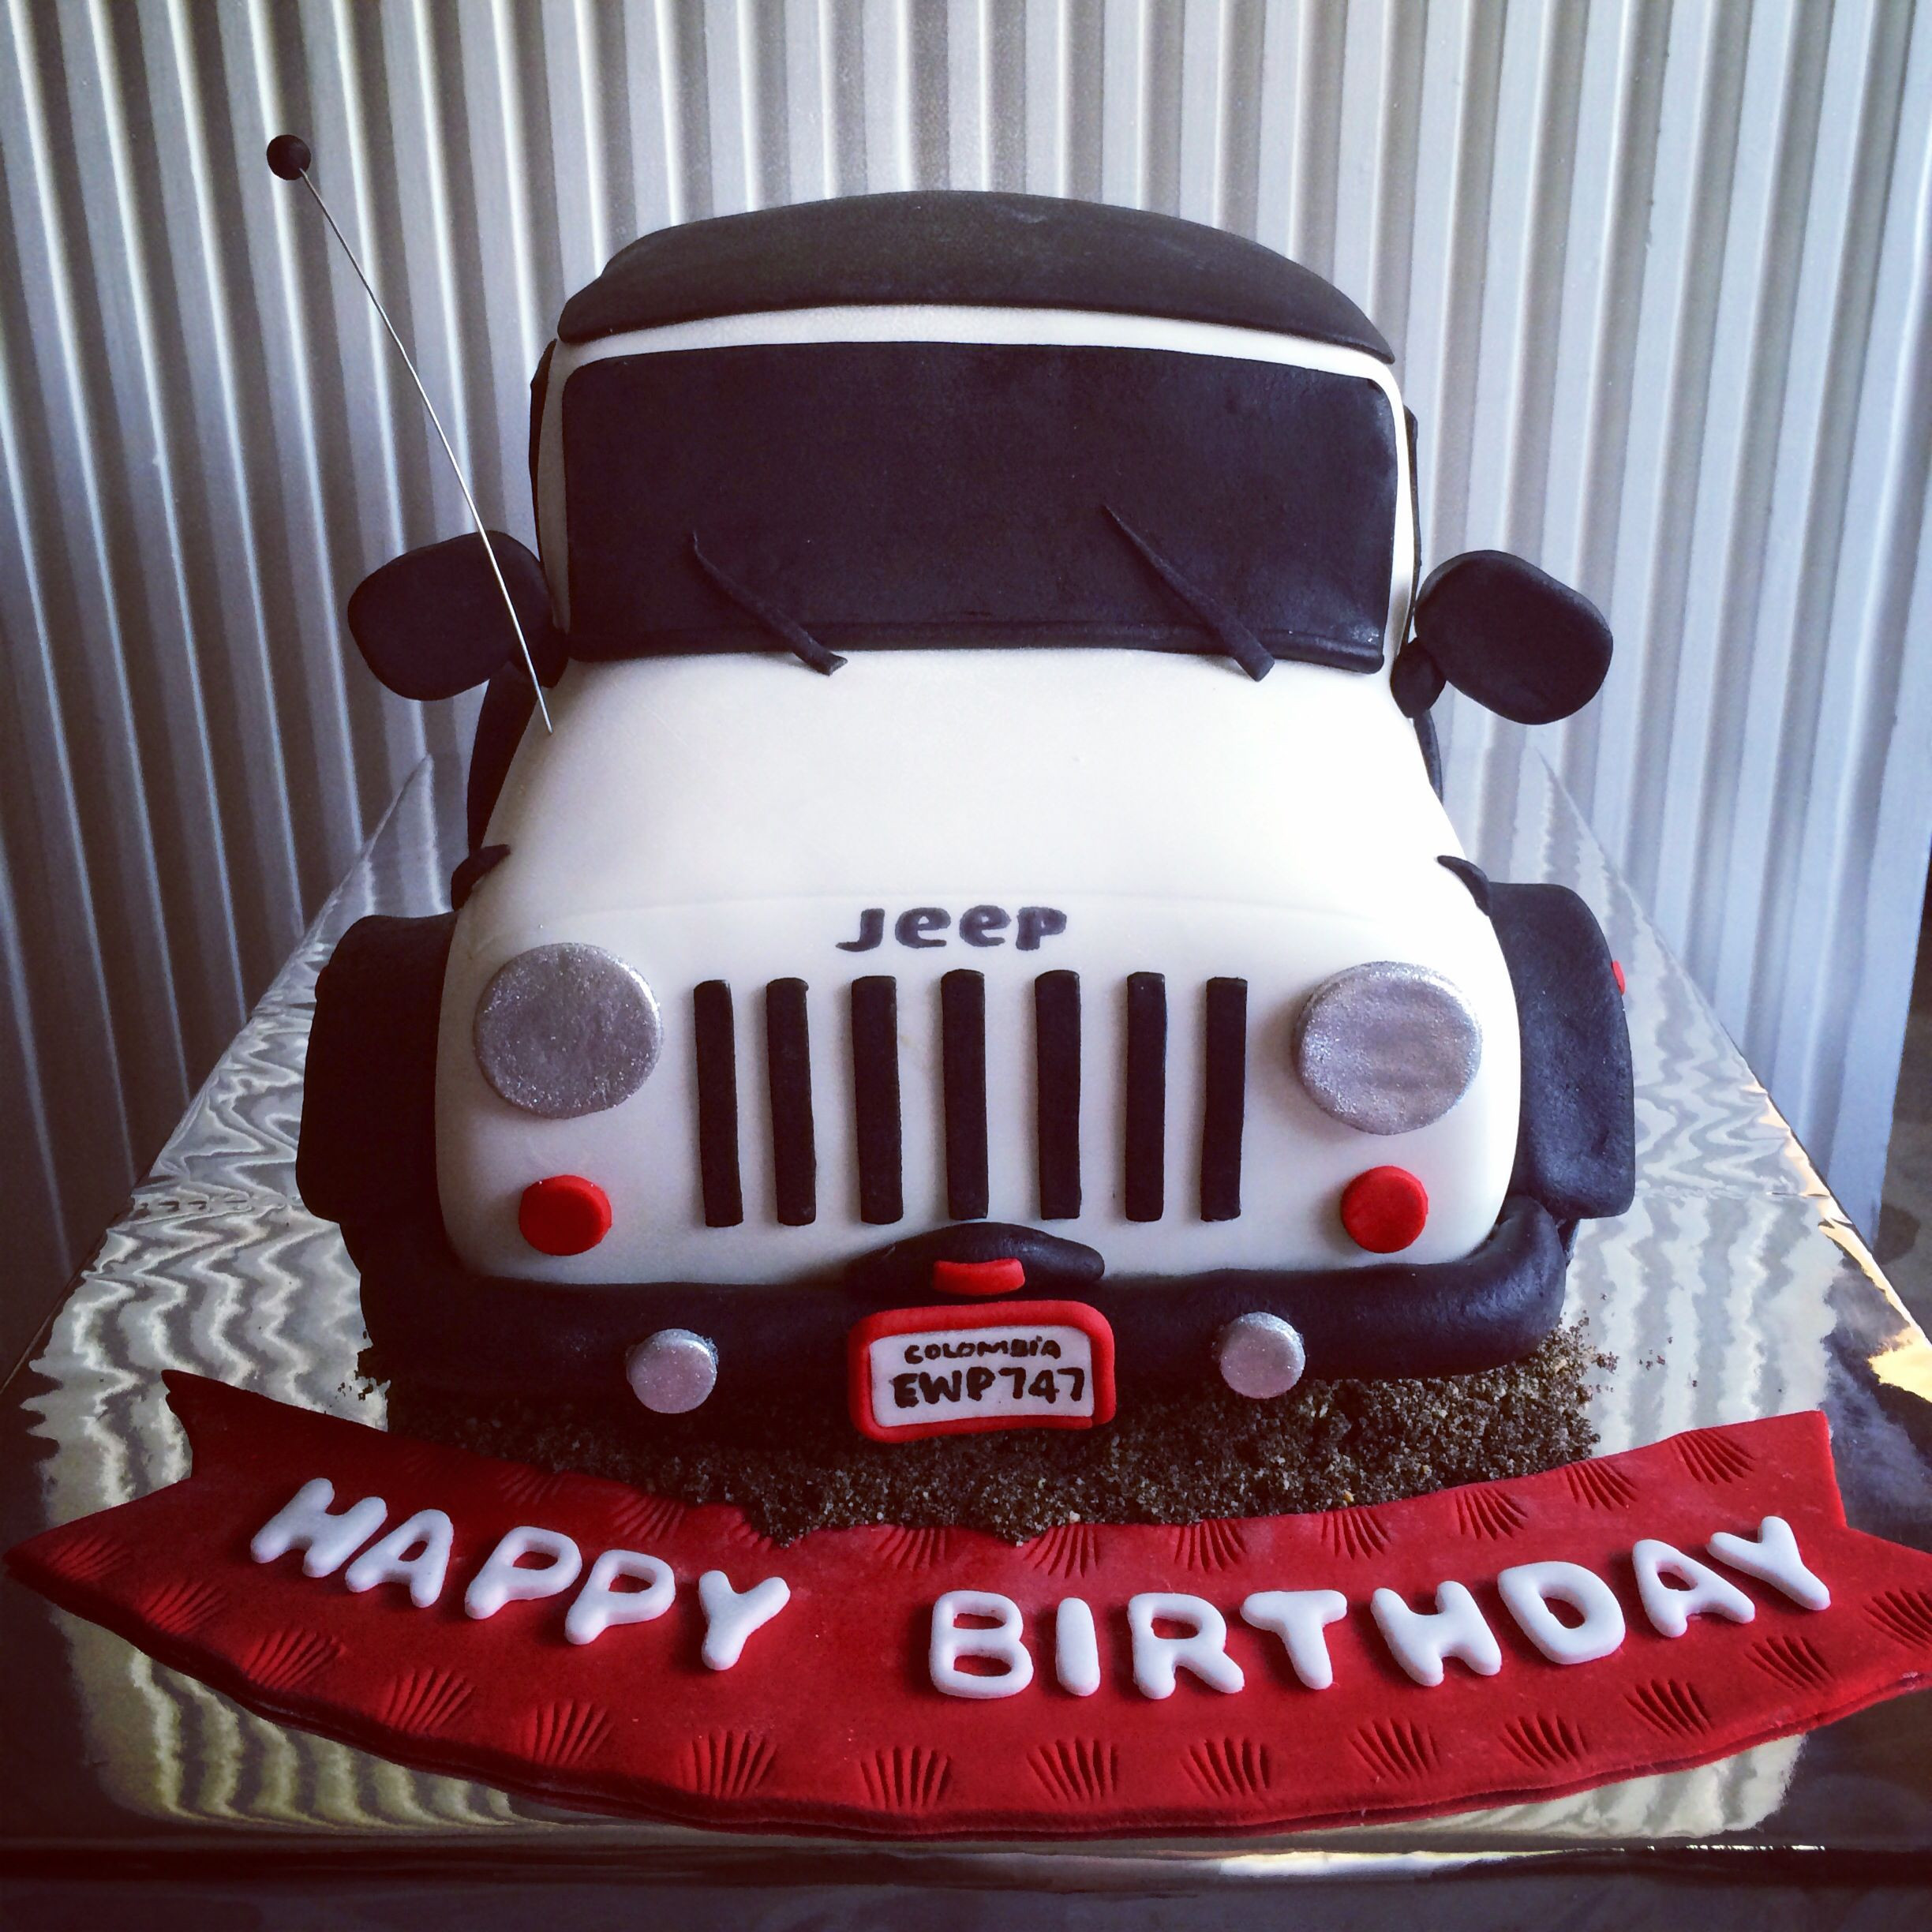 Jeep Birthday Cake
 Jeep cake I want this for my b day